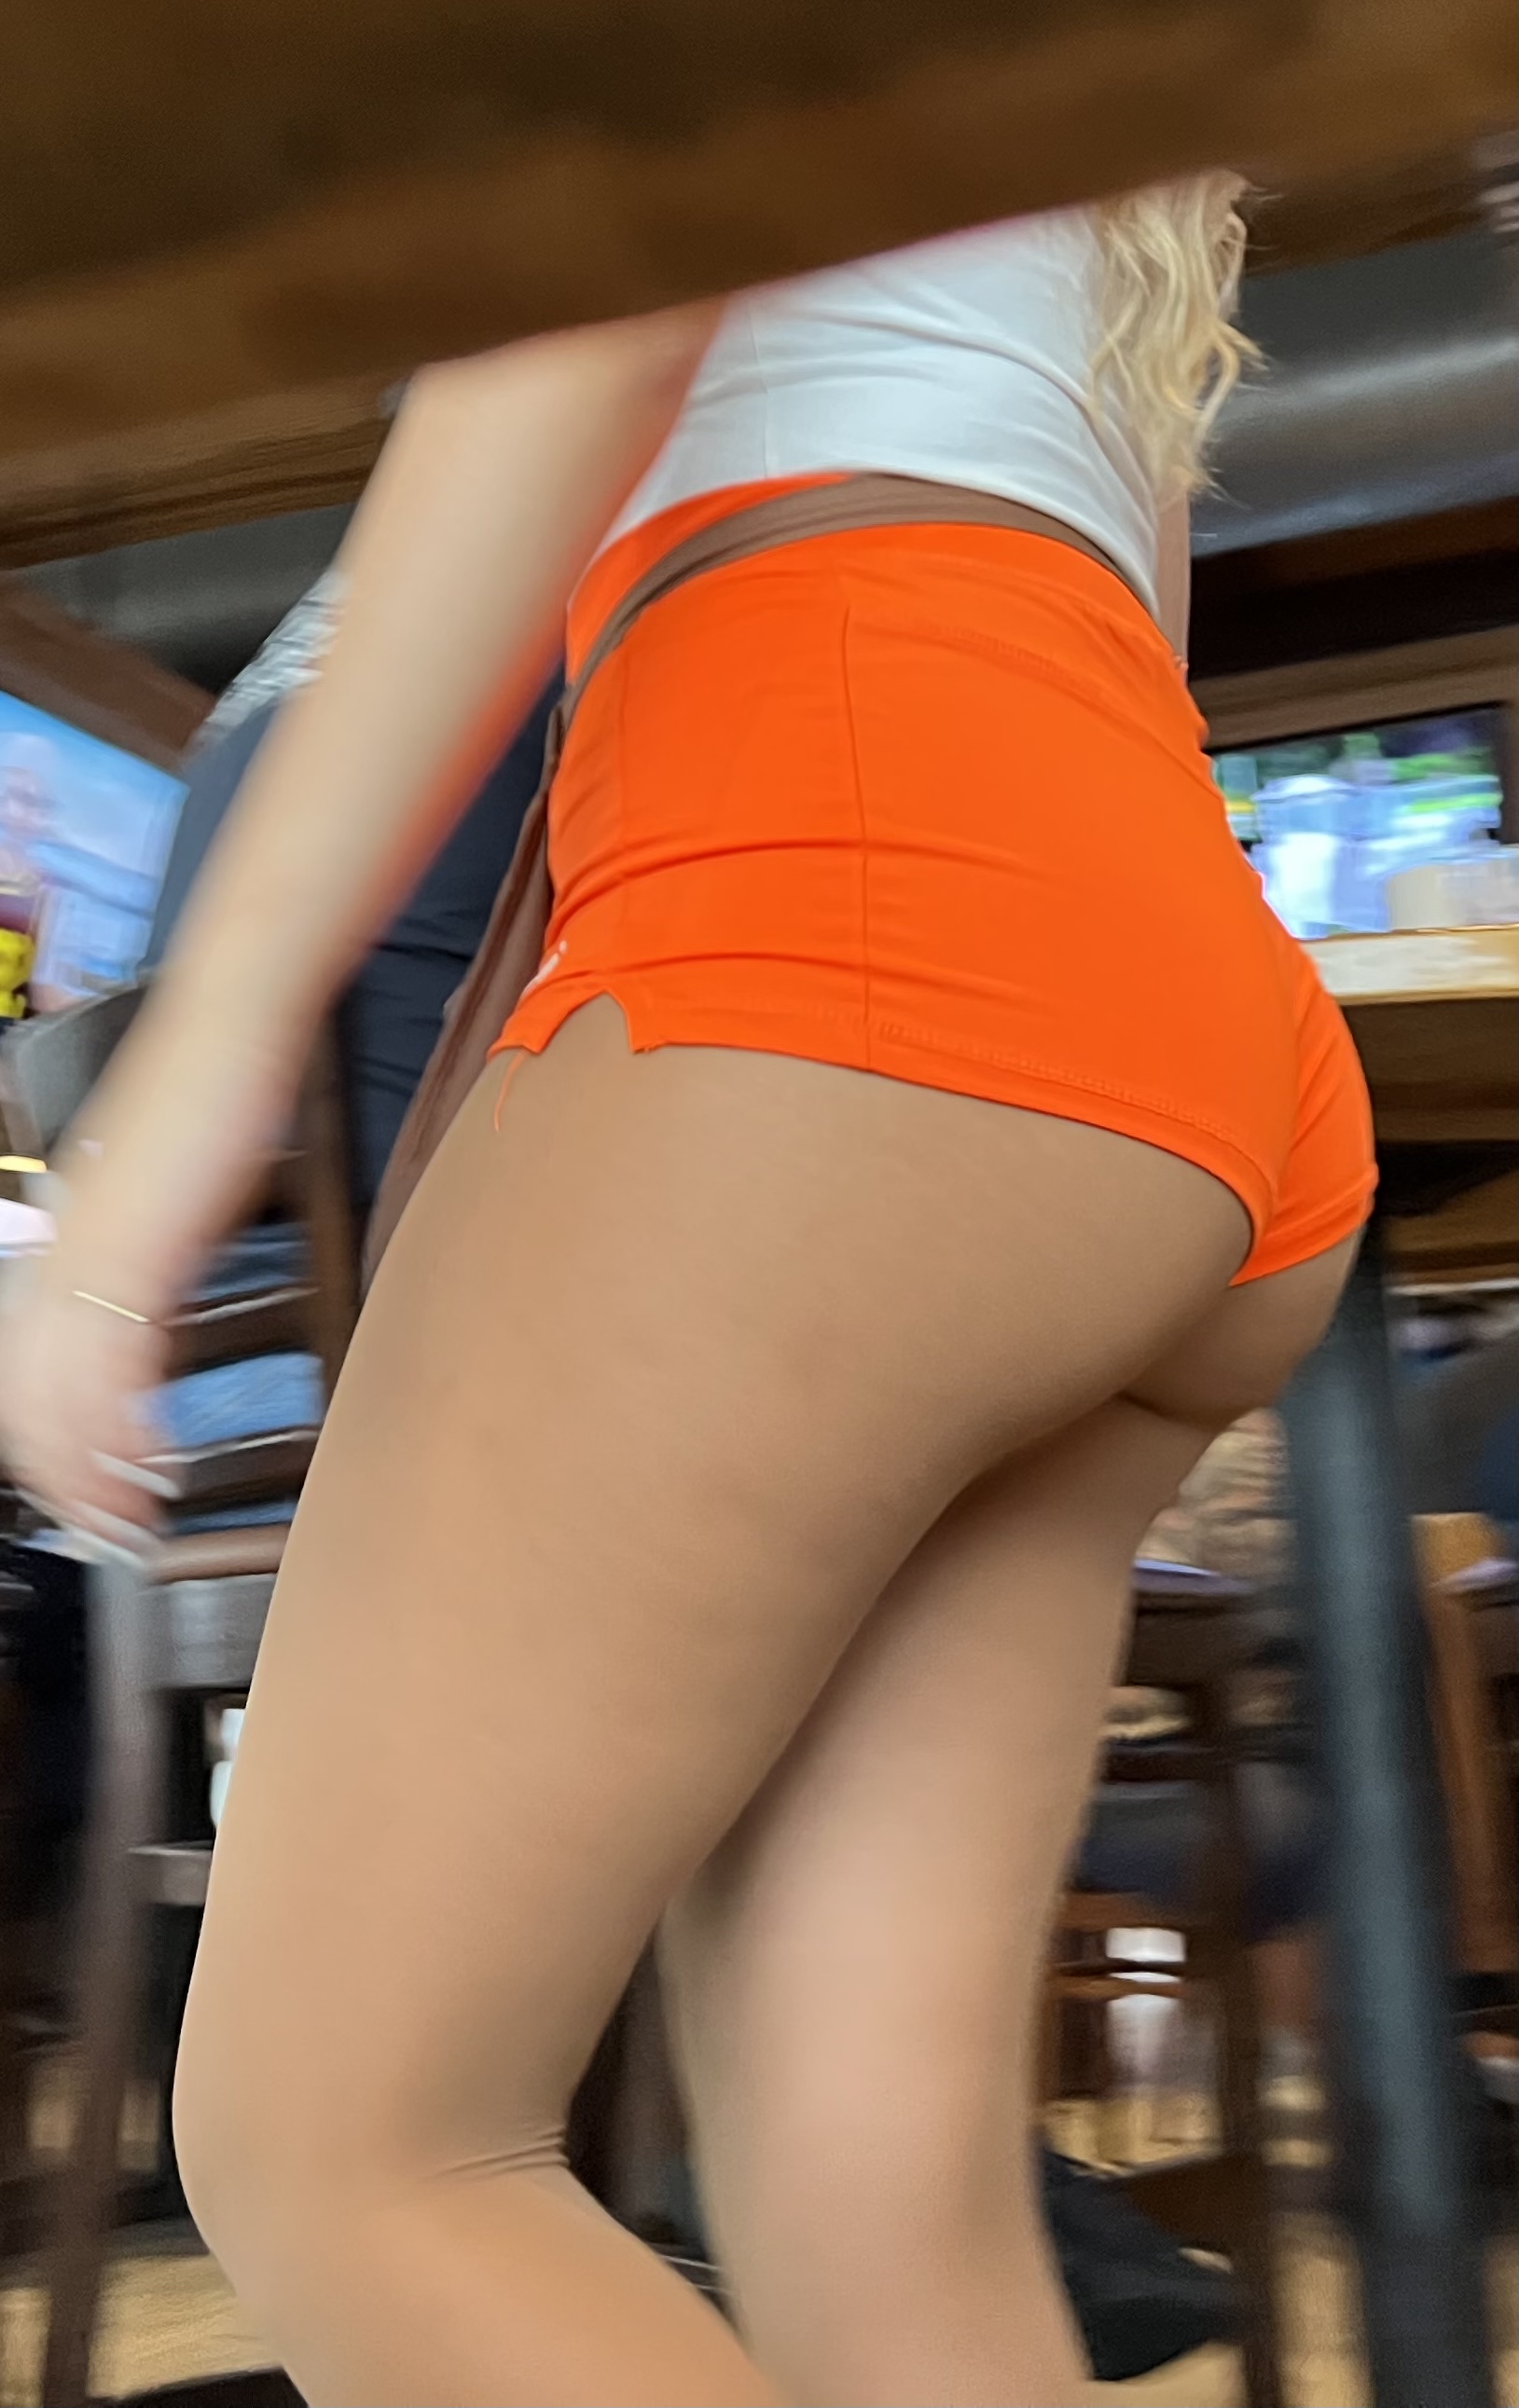 MEGAPOST - Hooters.